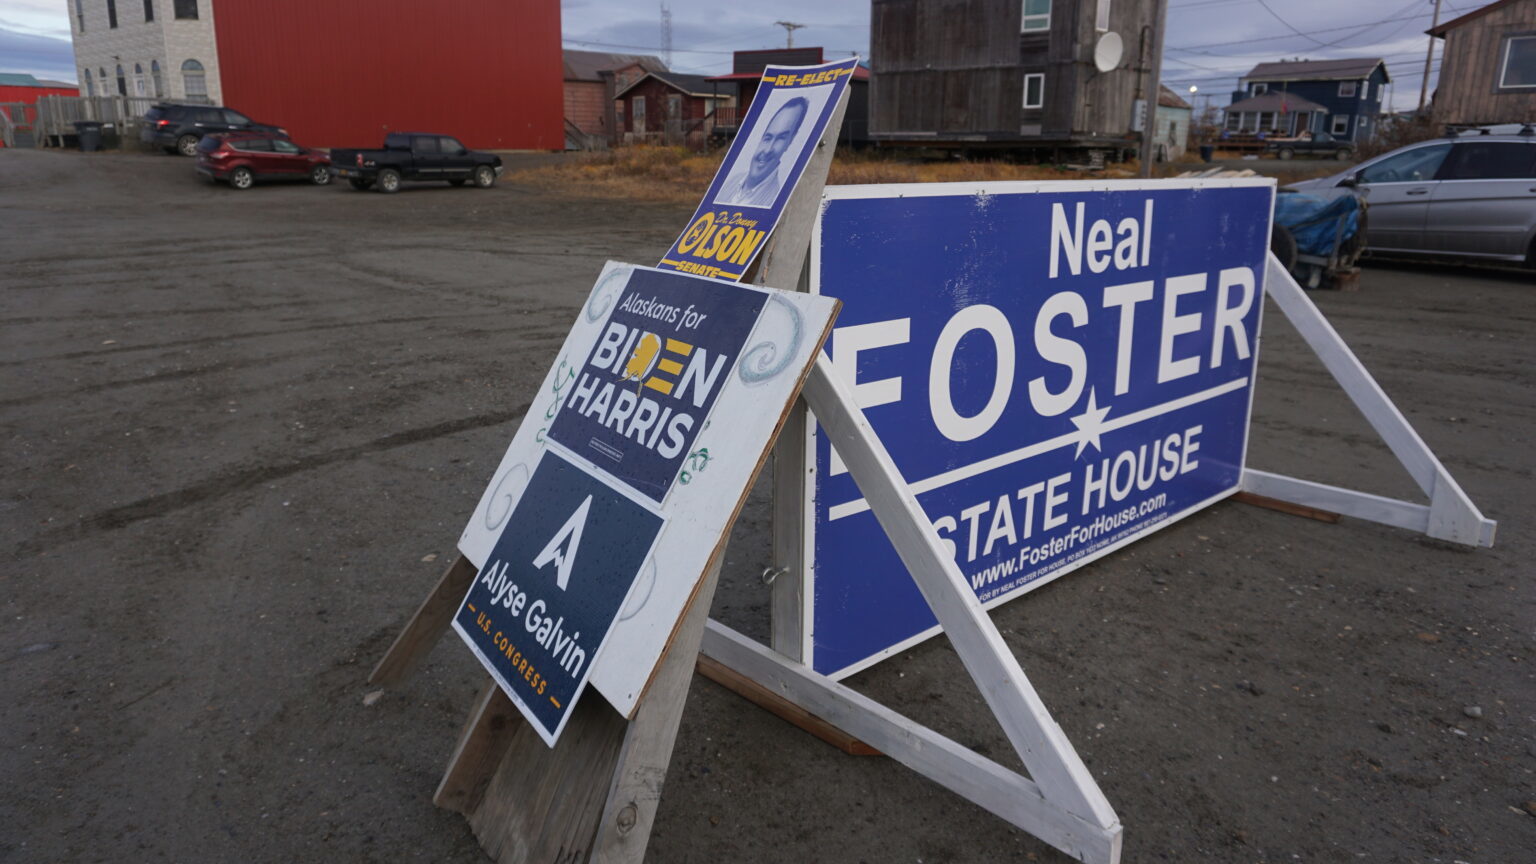 Alaska’s majority-Native districts had uneven voter turnout in 2020, analysis finds